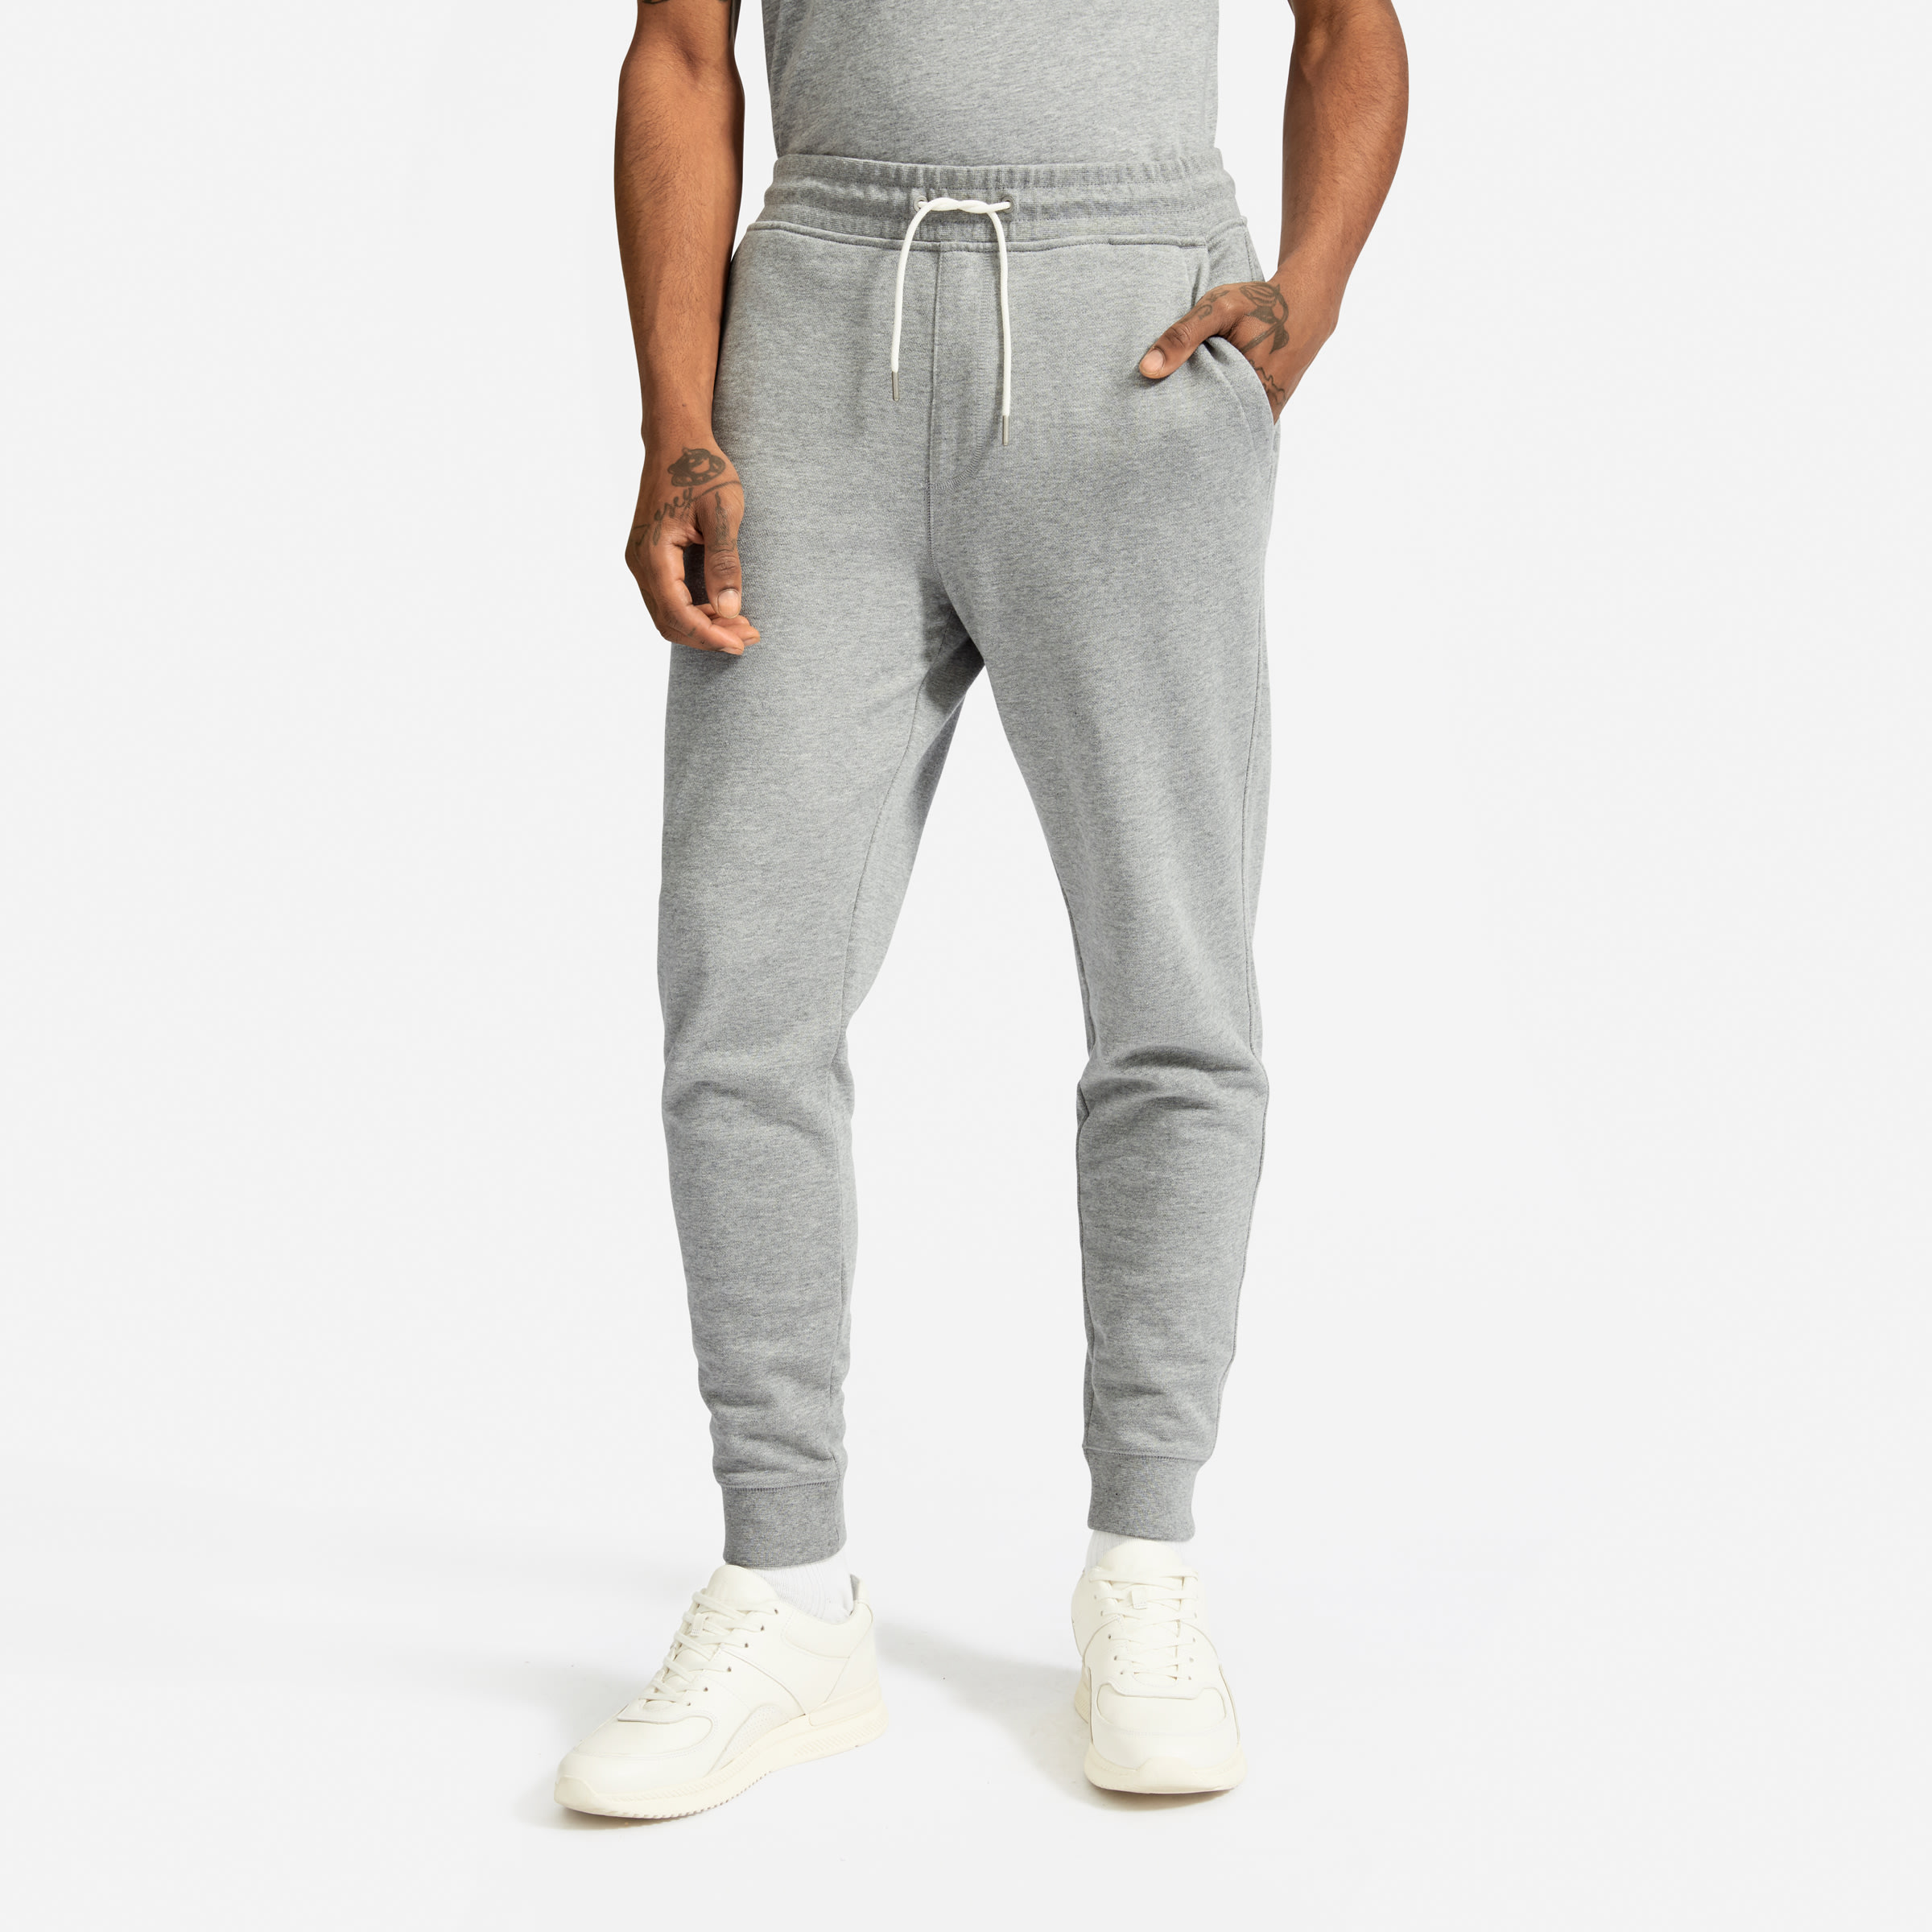 overraskelse diagram Optimistisk The Classic French Terry Sweatpant Heathered Grey – Everlane